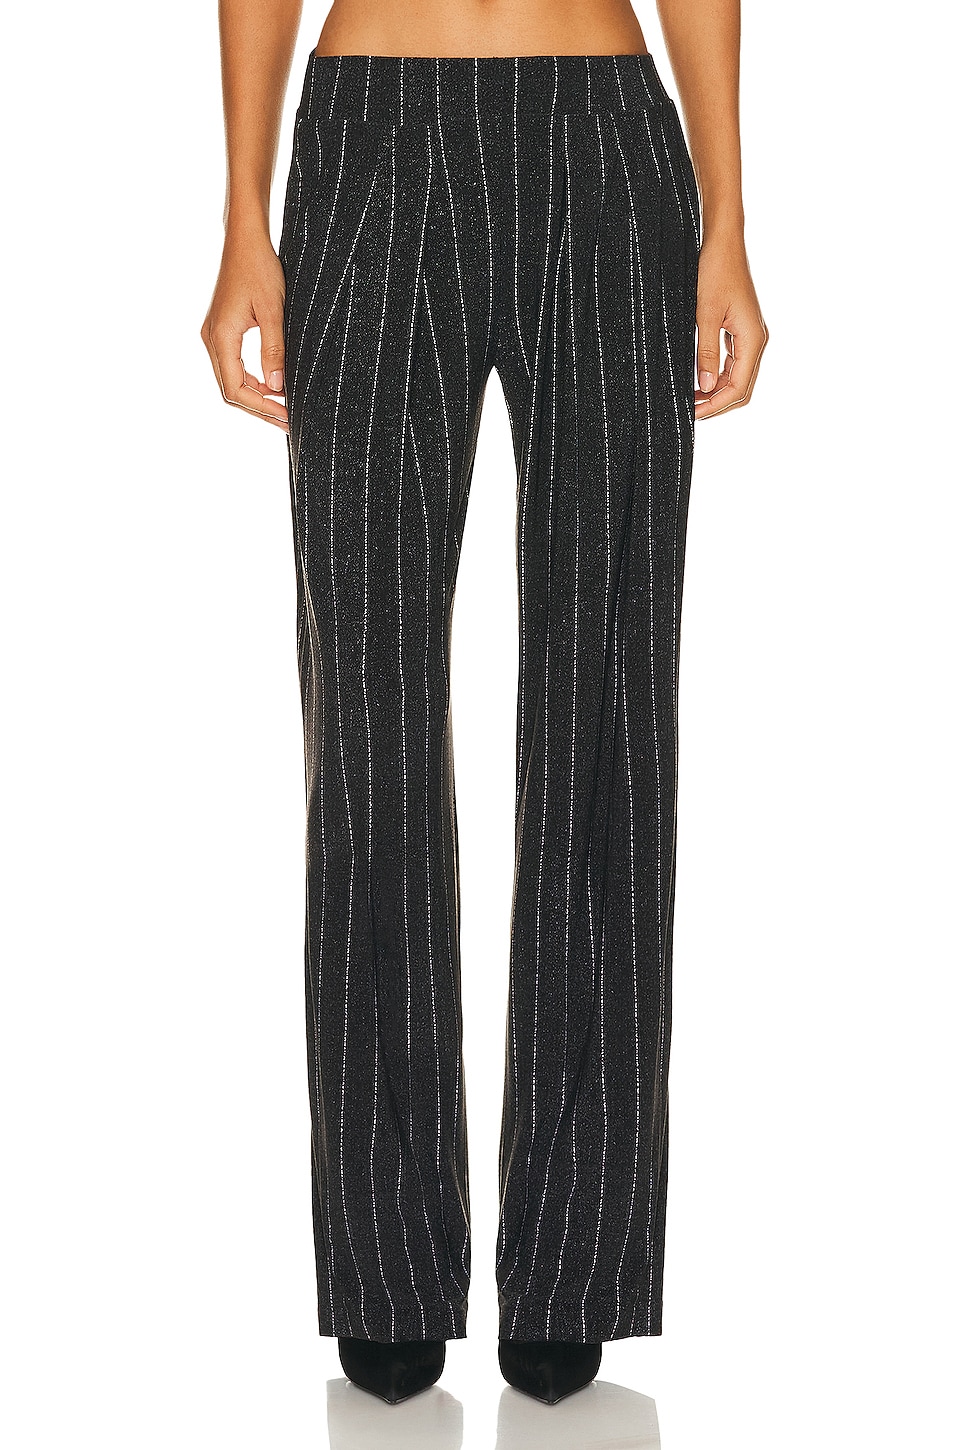 Image 1 of Norma Kamali Low Rise Pleated Trouser in Pinstripe